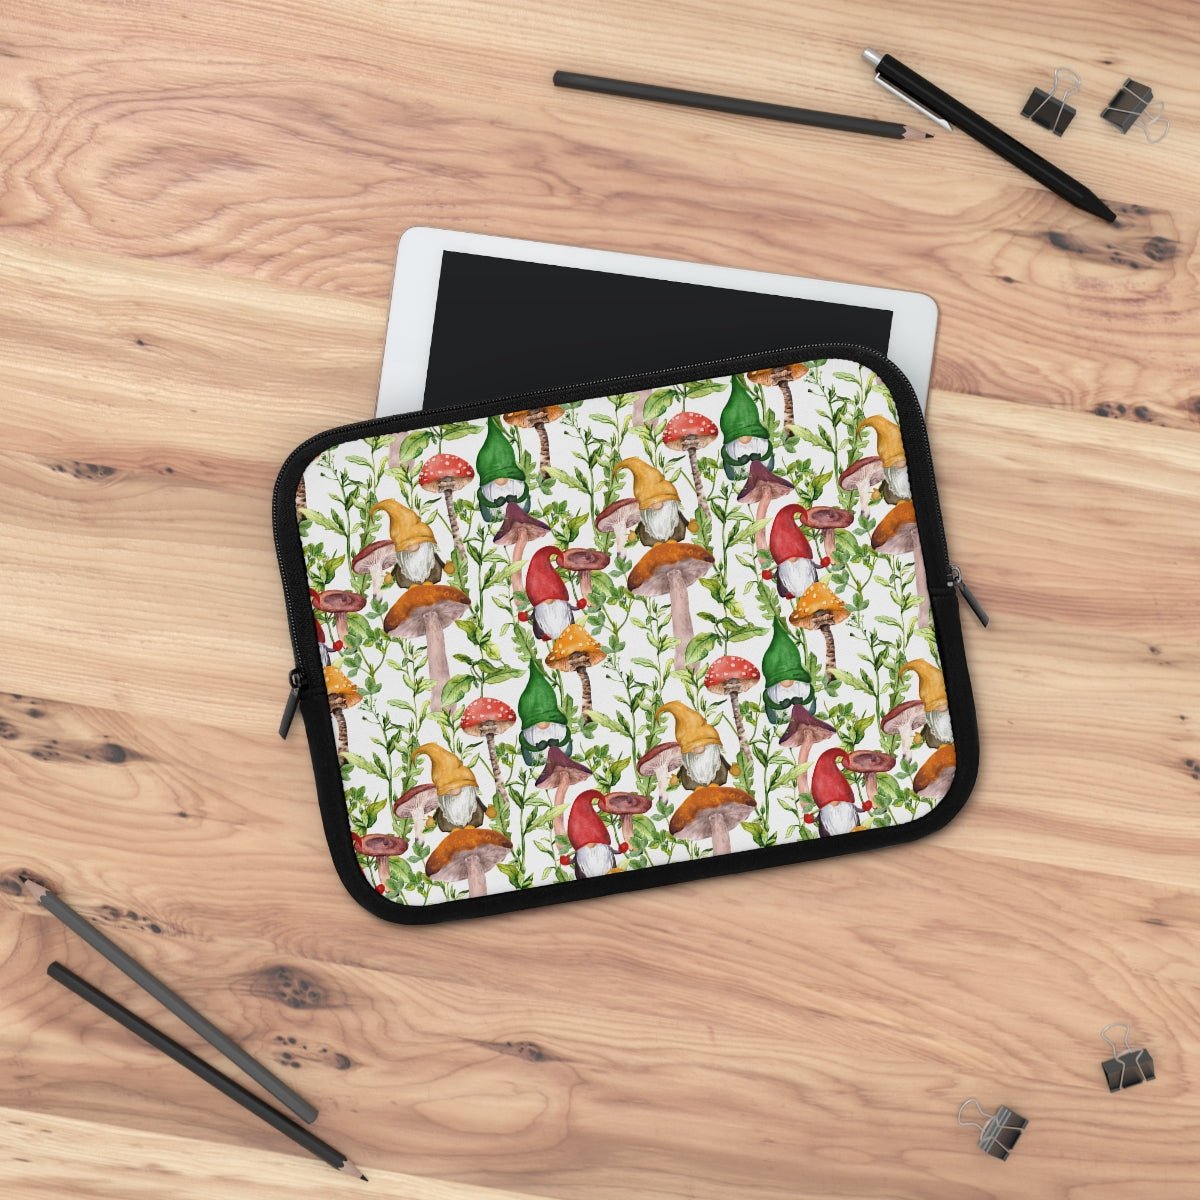 Gnomes and Mushrooms Laptop Sleeve - Puffin Lime